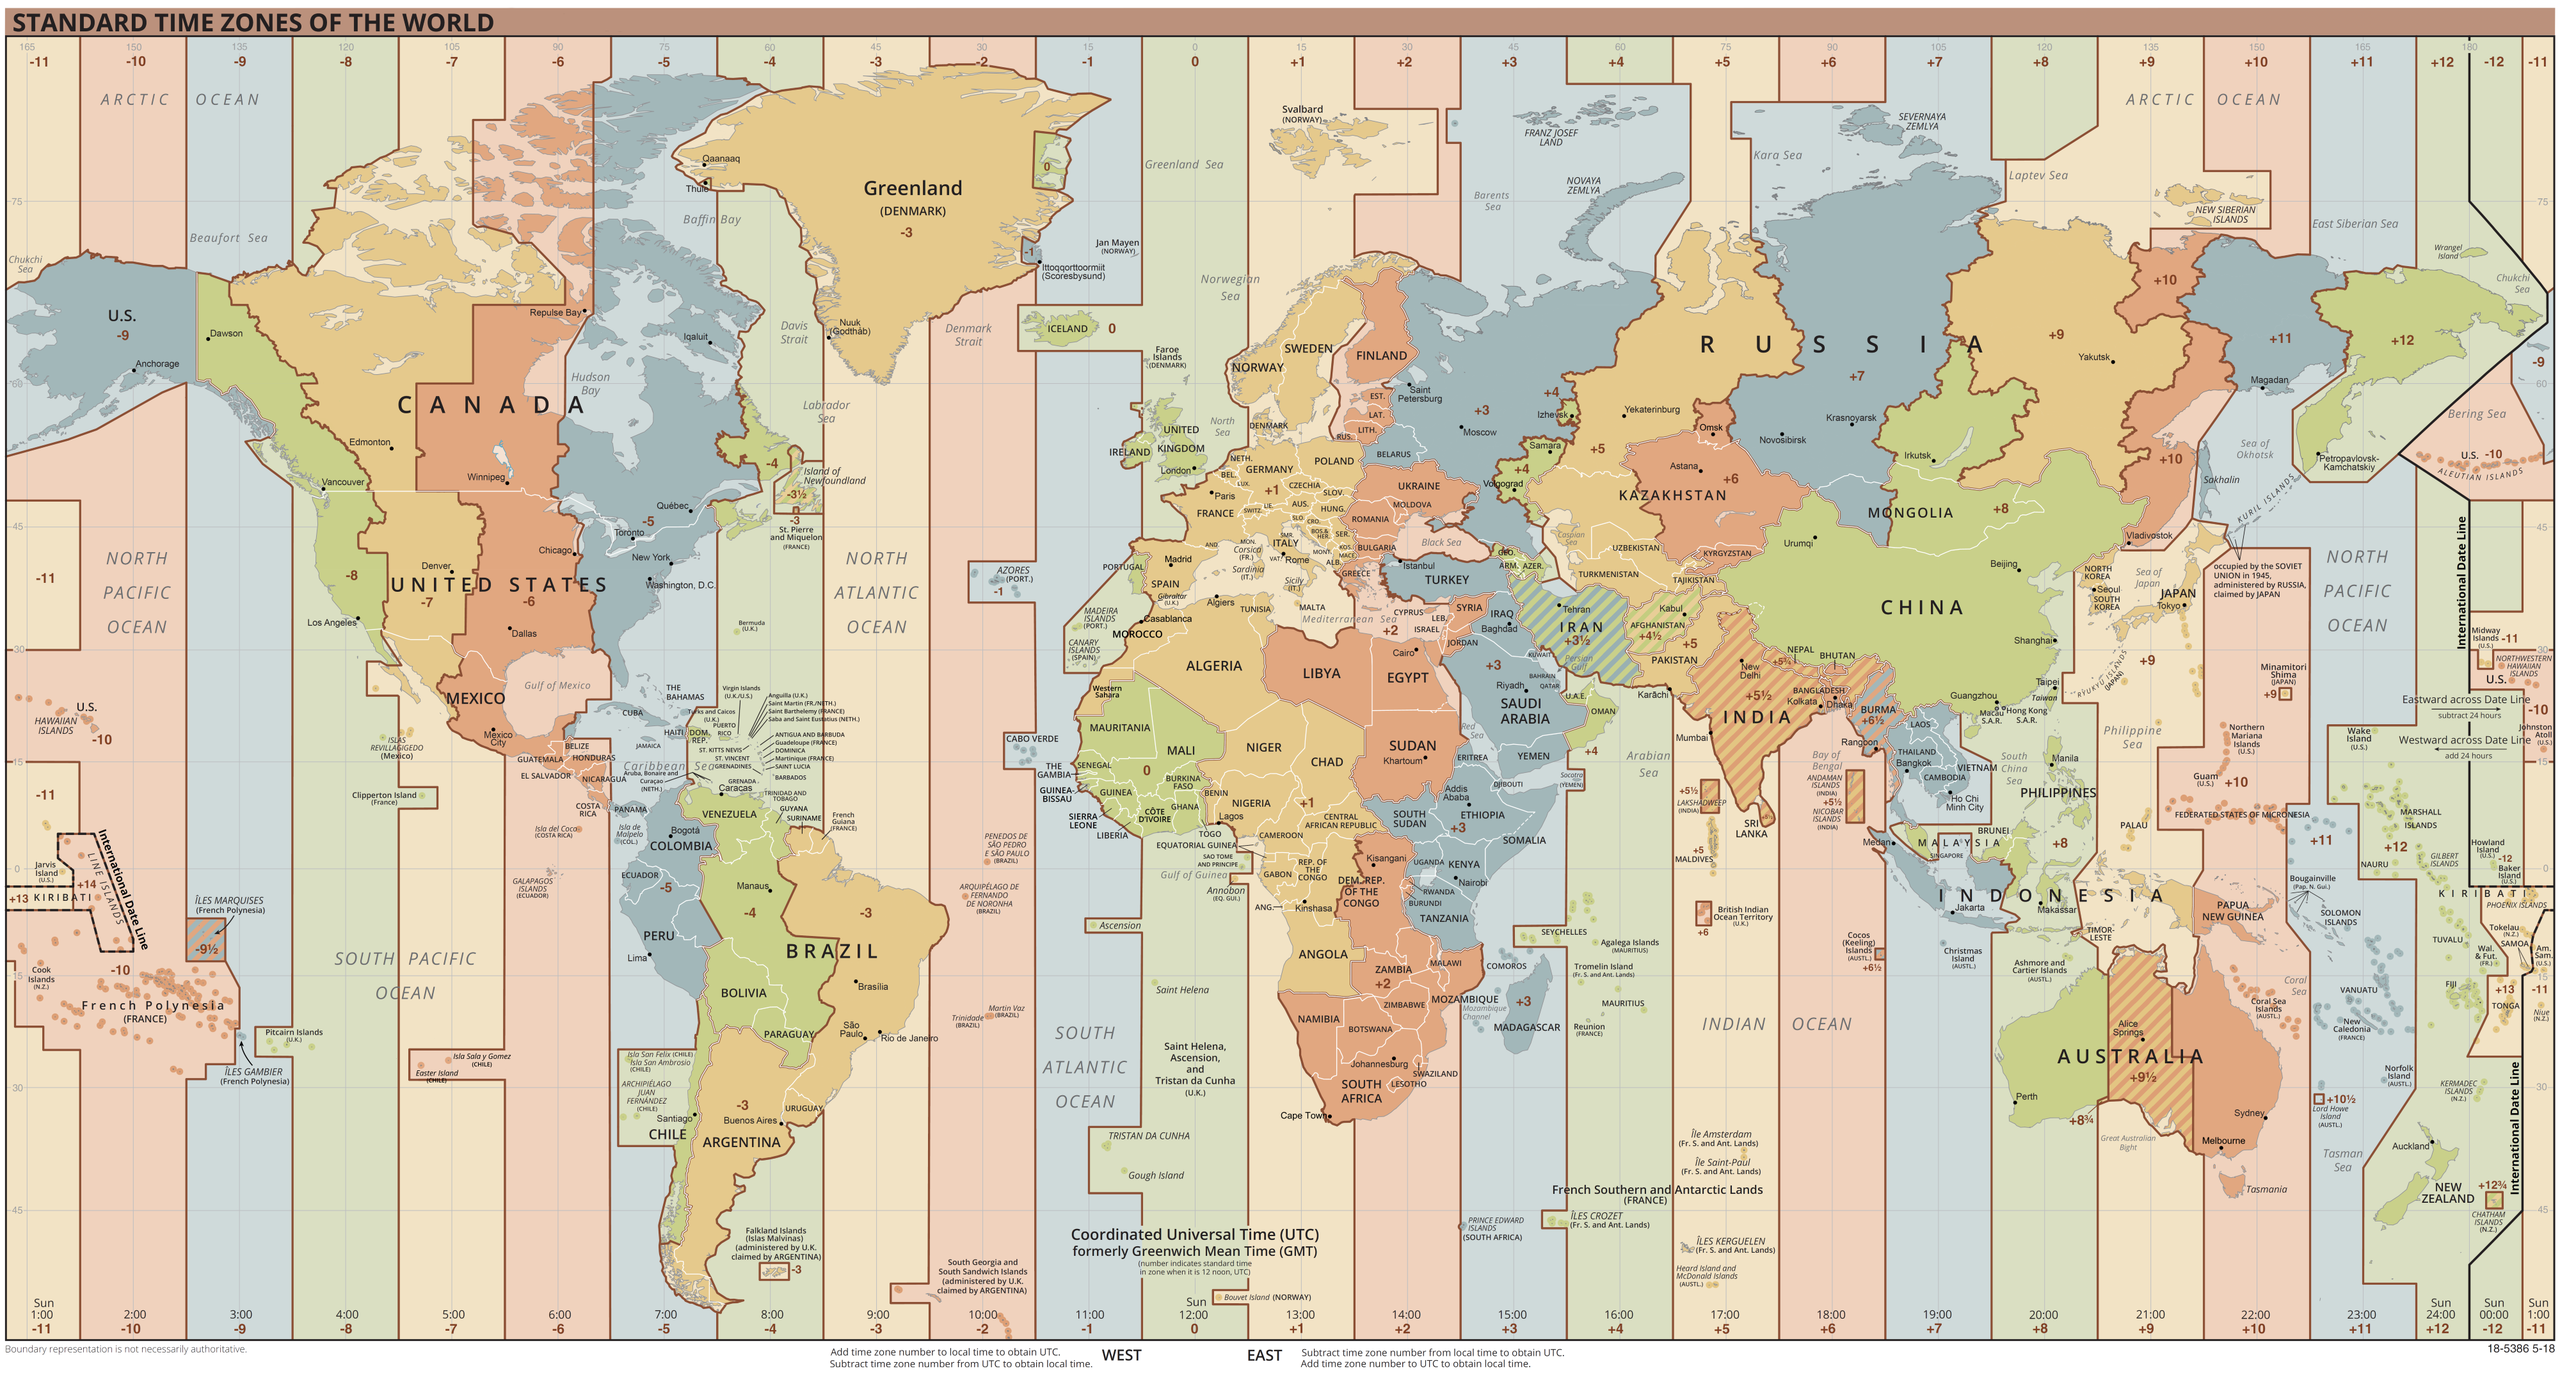 2560px-World Time Zones Map.png